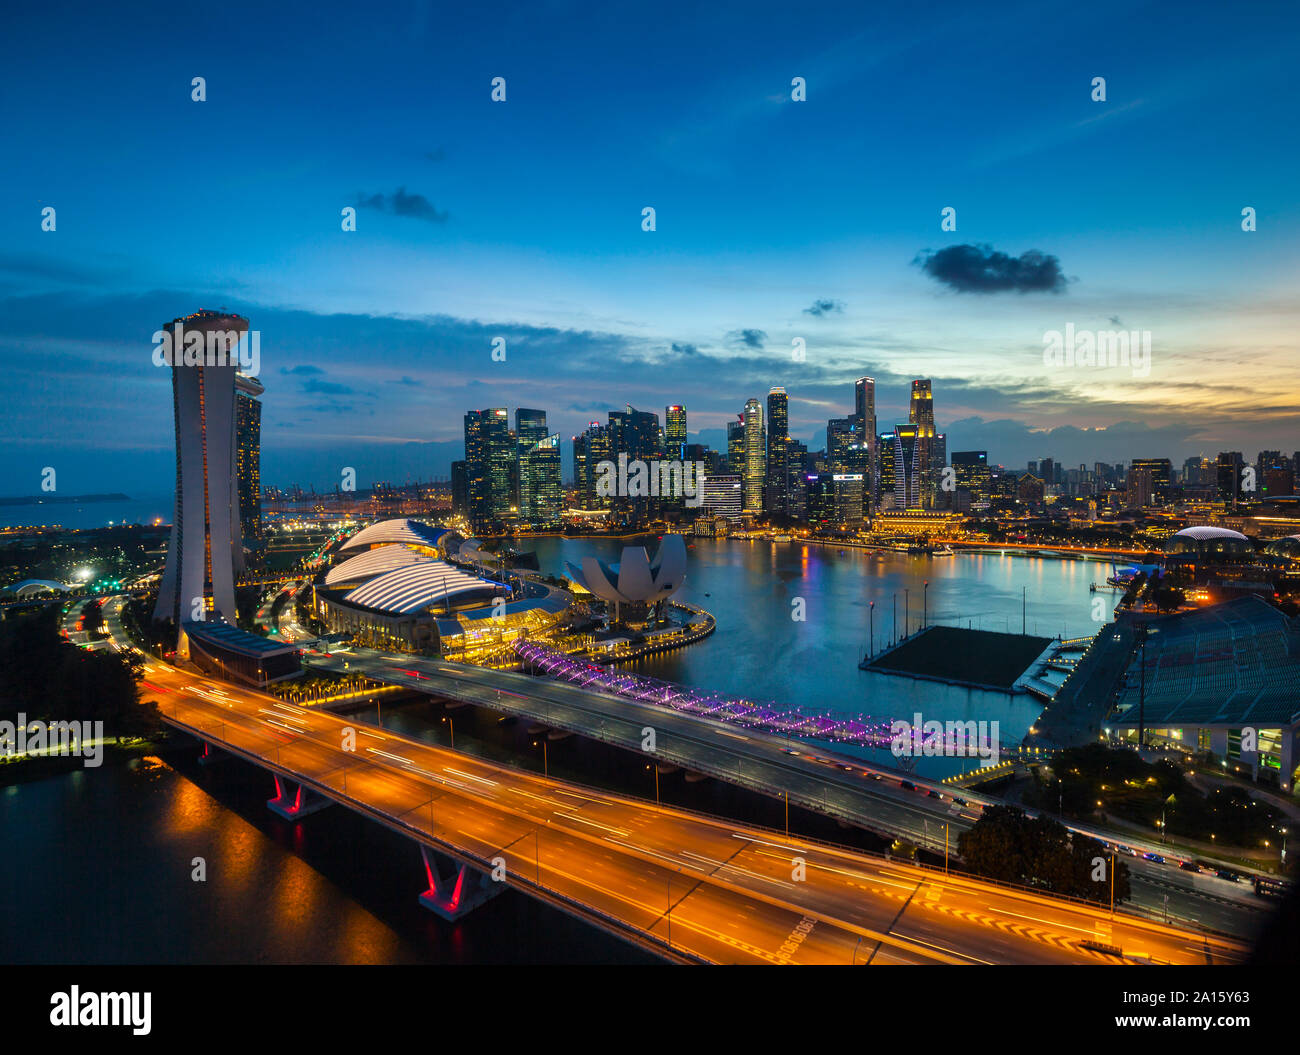 Skyline of Financial District and Marina Bay at sunset, Singapore Stock Photo